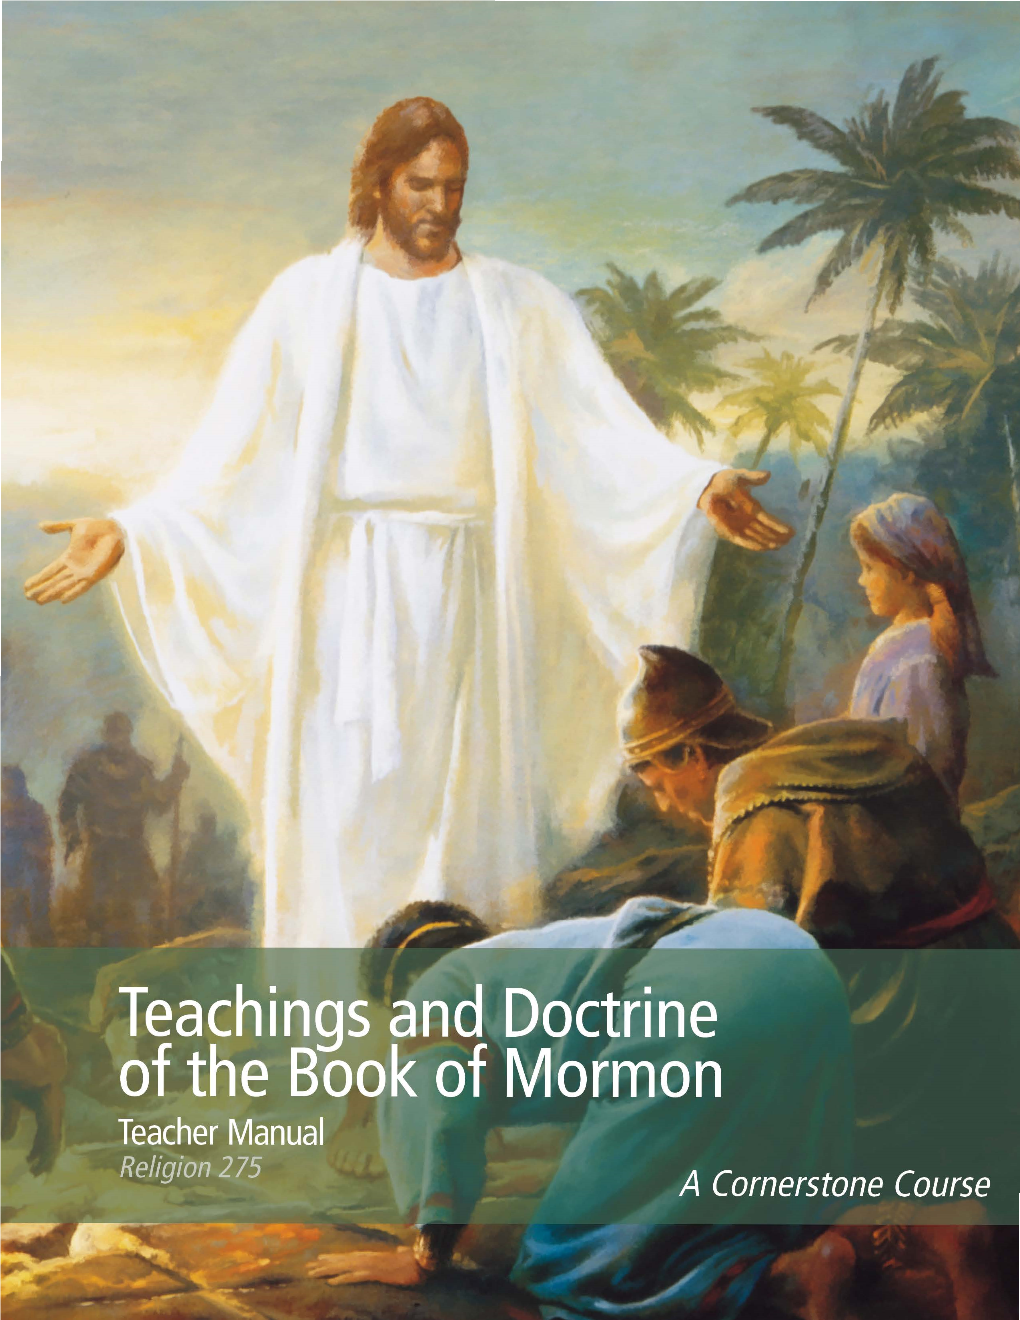 Teachings and Doctrine of the Book of Mormon Teacher Manual Religion 275